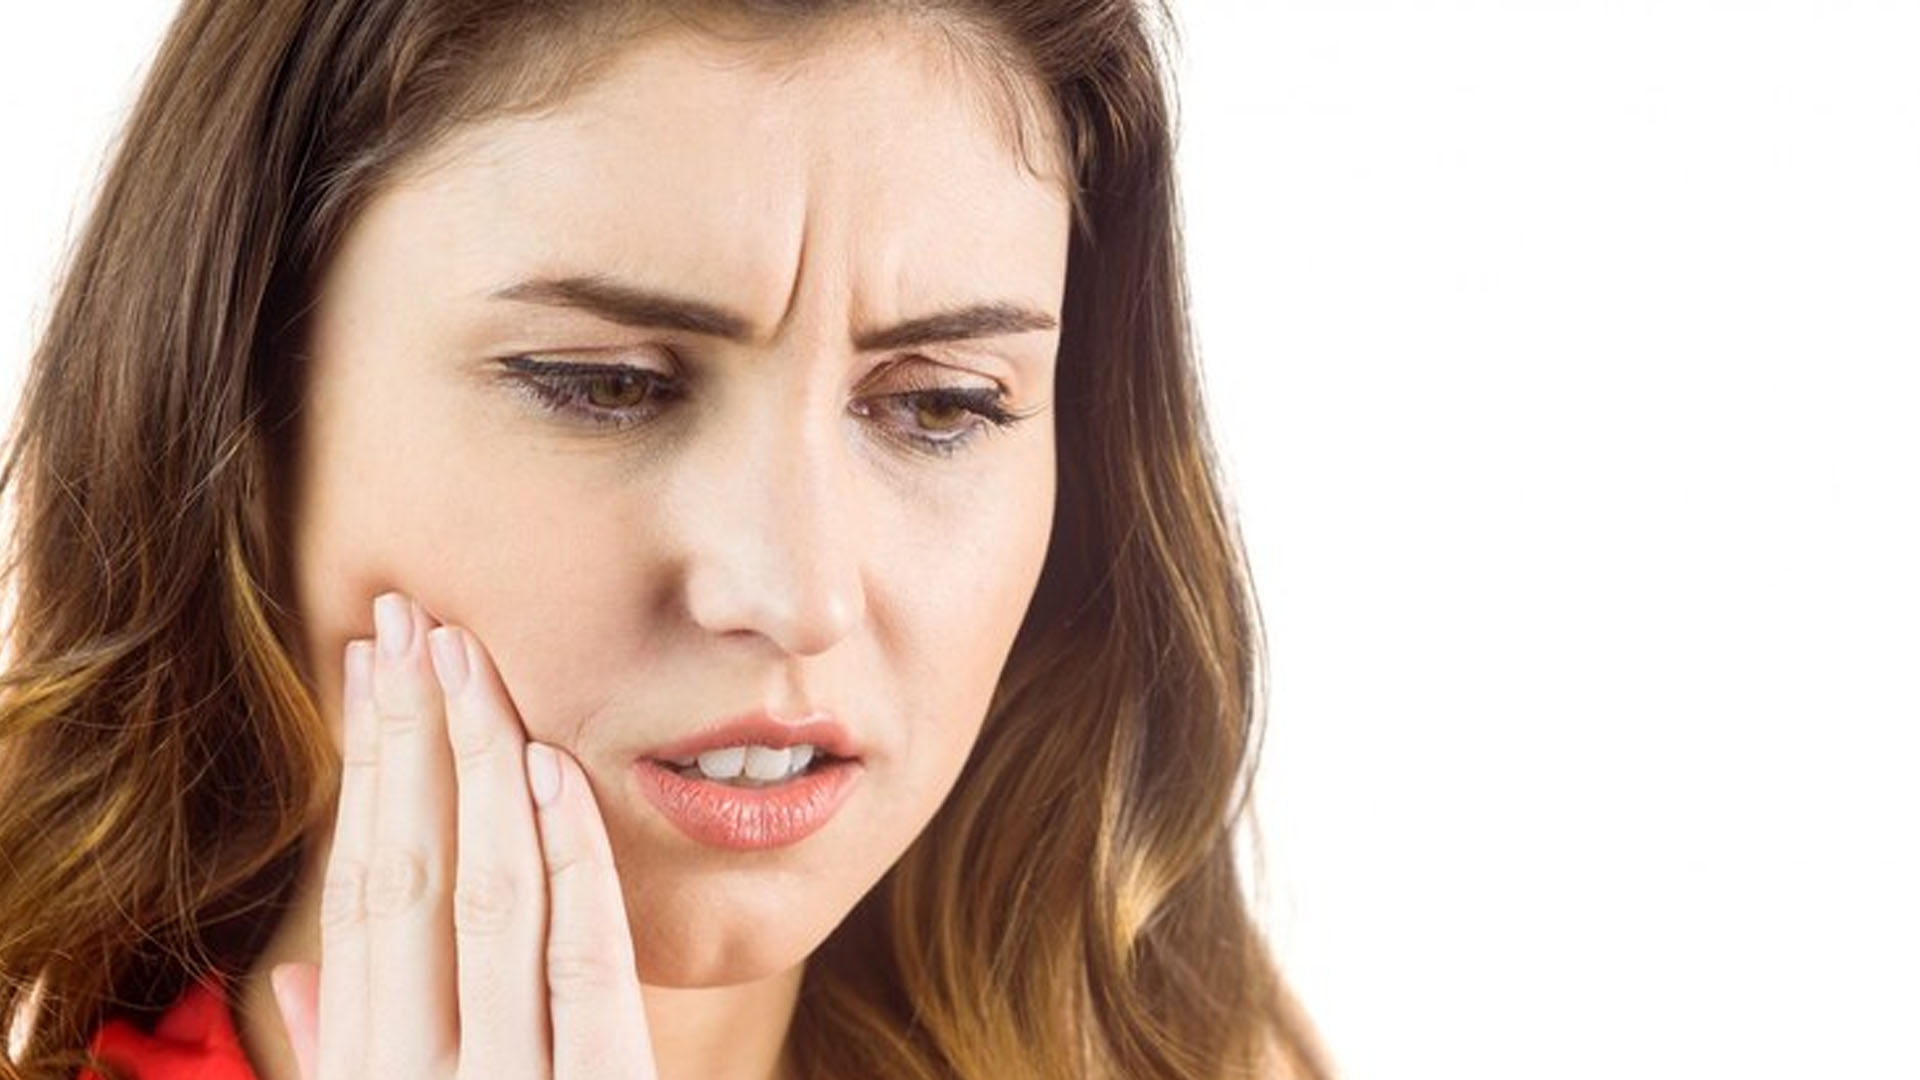 What are the Home Remedies to treat Oral Lichen Planus?